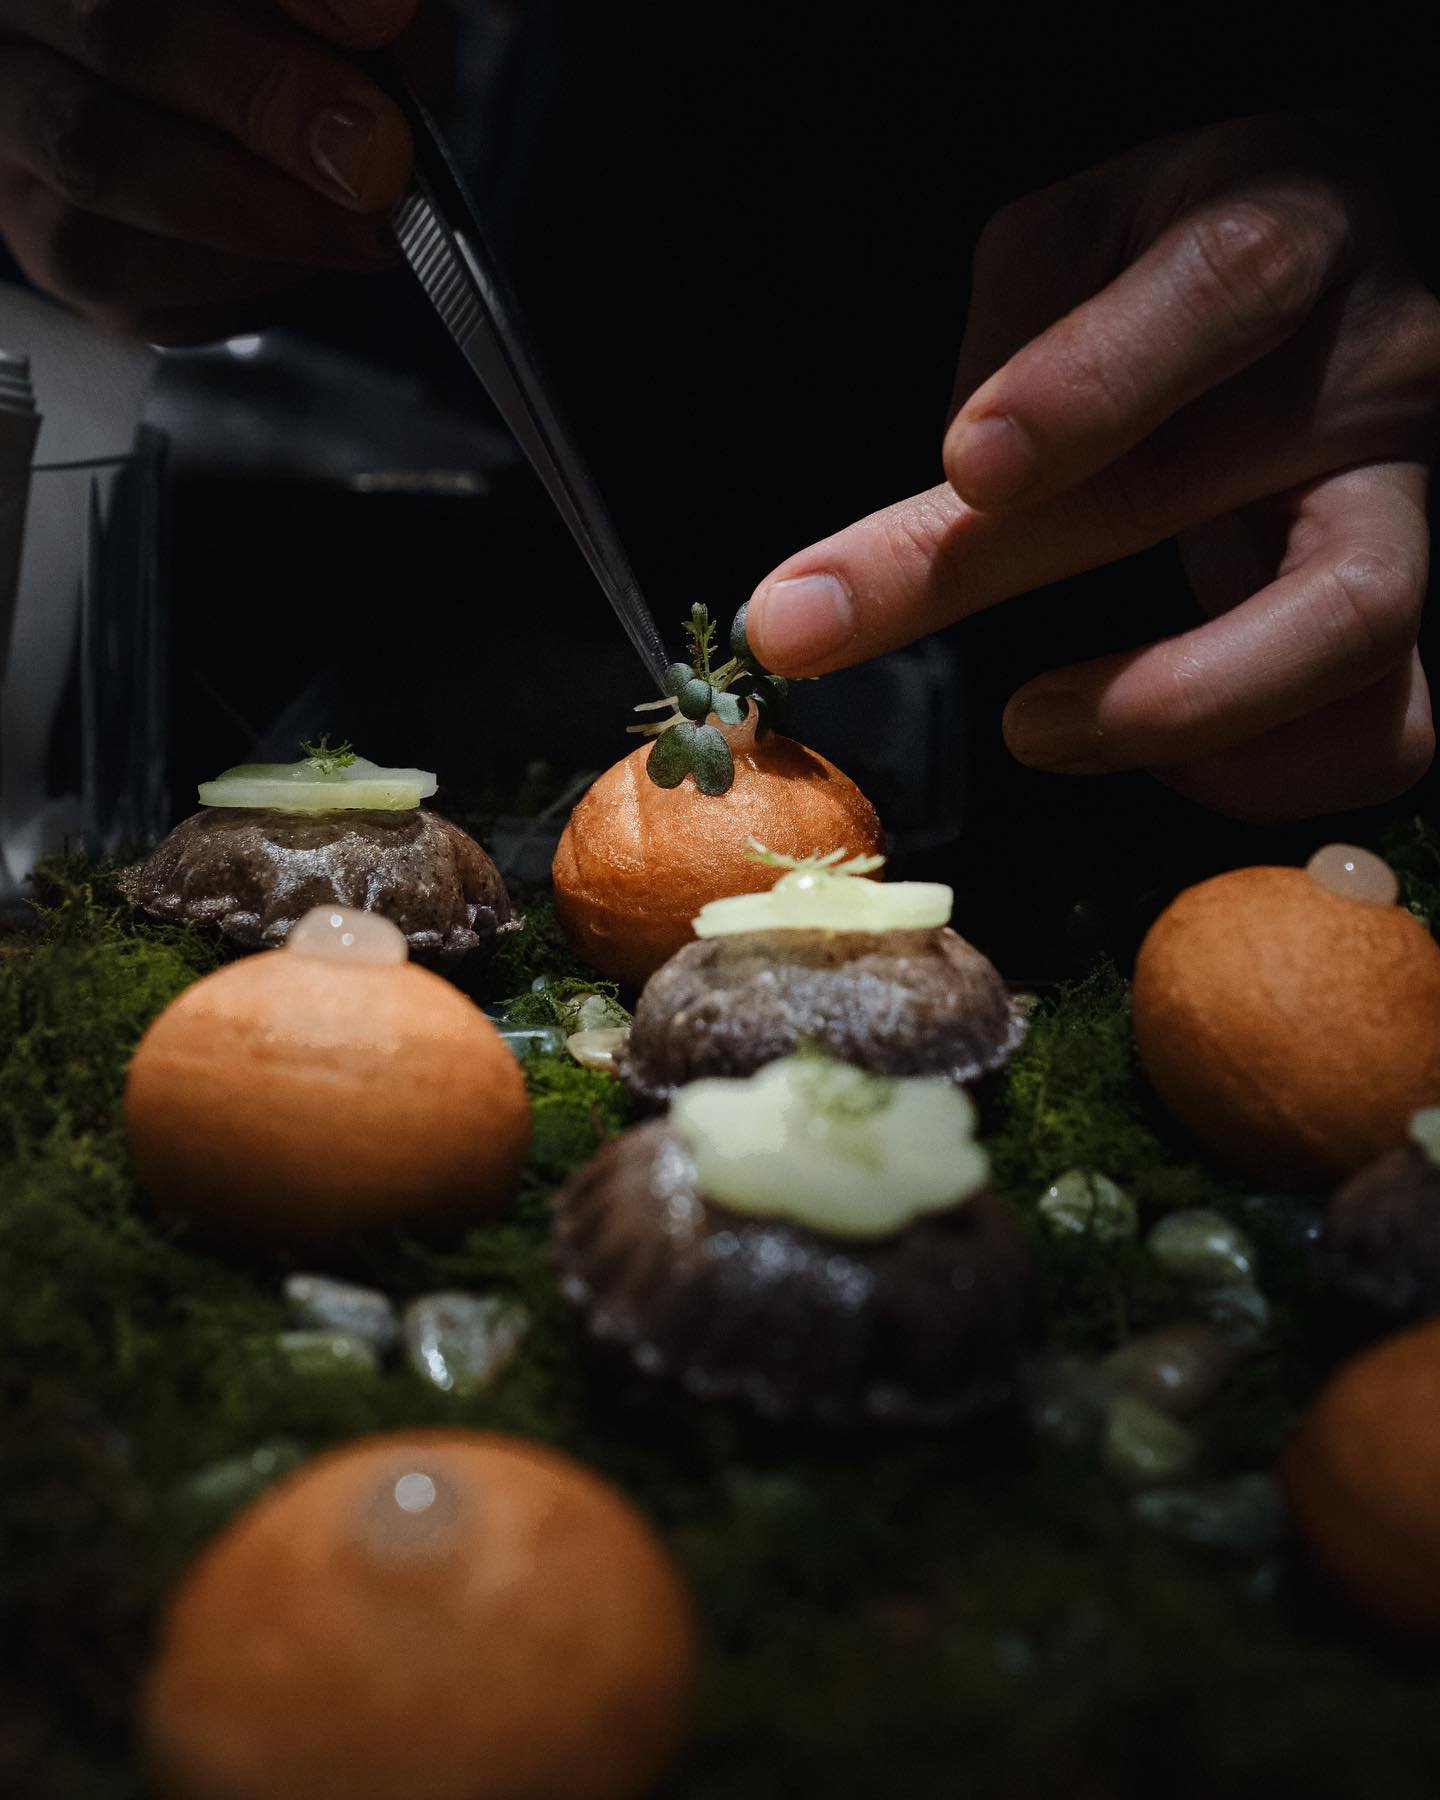 At MONO, we go above and beyond, offering a bespoke culinary journey with customised catering services that showcase a breadth of Latin American-inspired canap&eacute;s and snacks. Our menu is meticulously tailored and thoughtfully curated to accommo